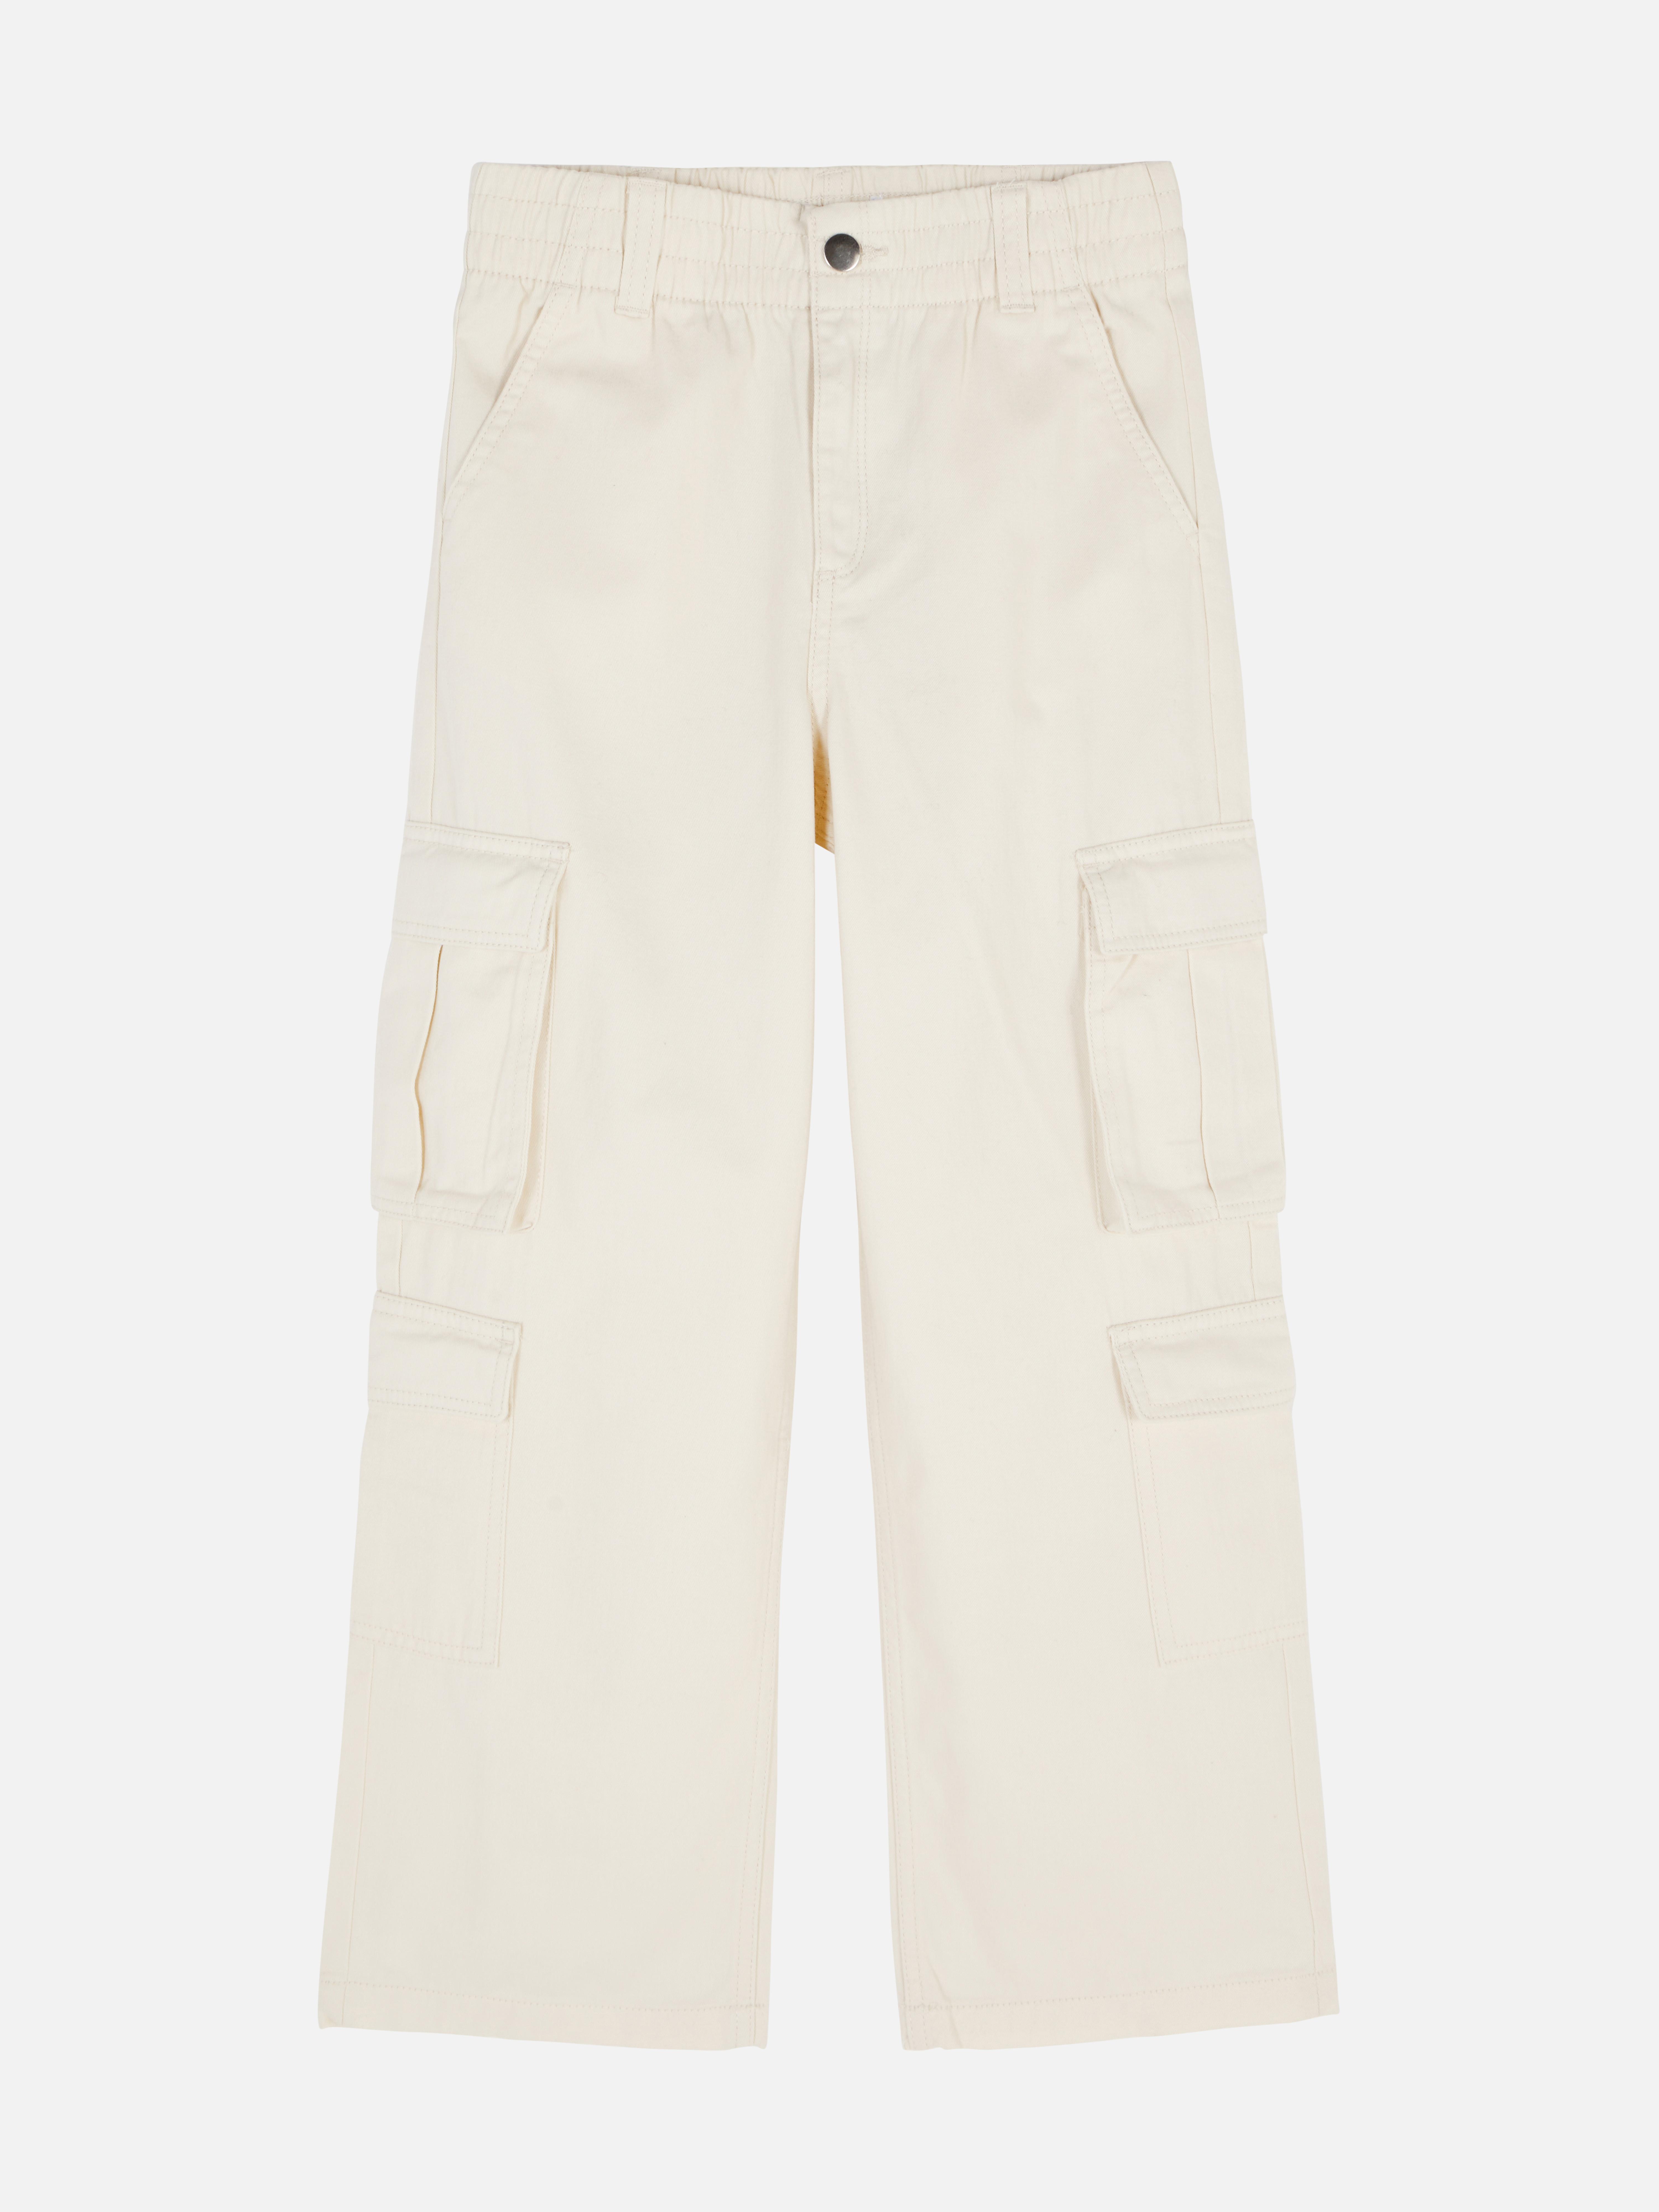 Utility Cargo Trousers